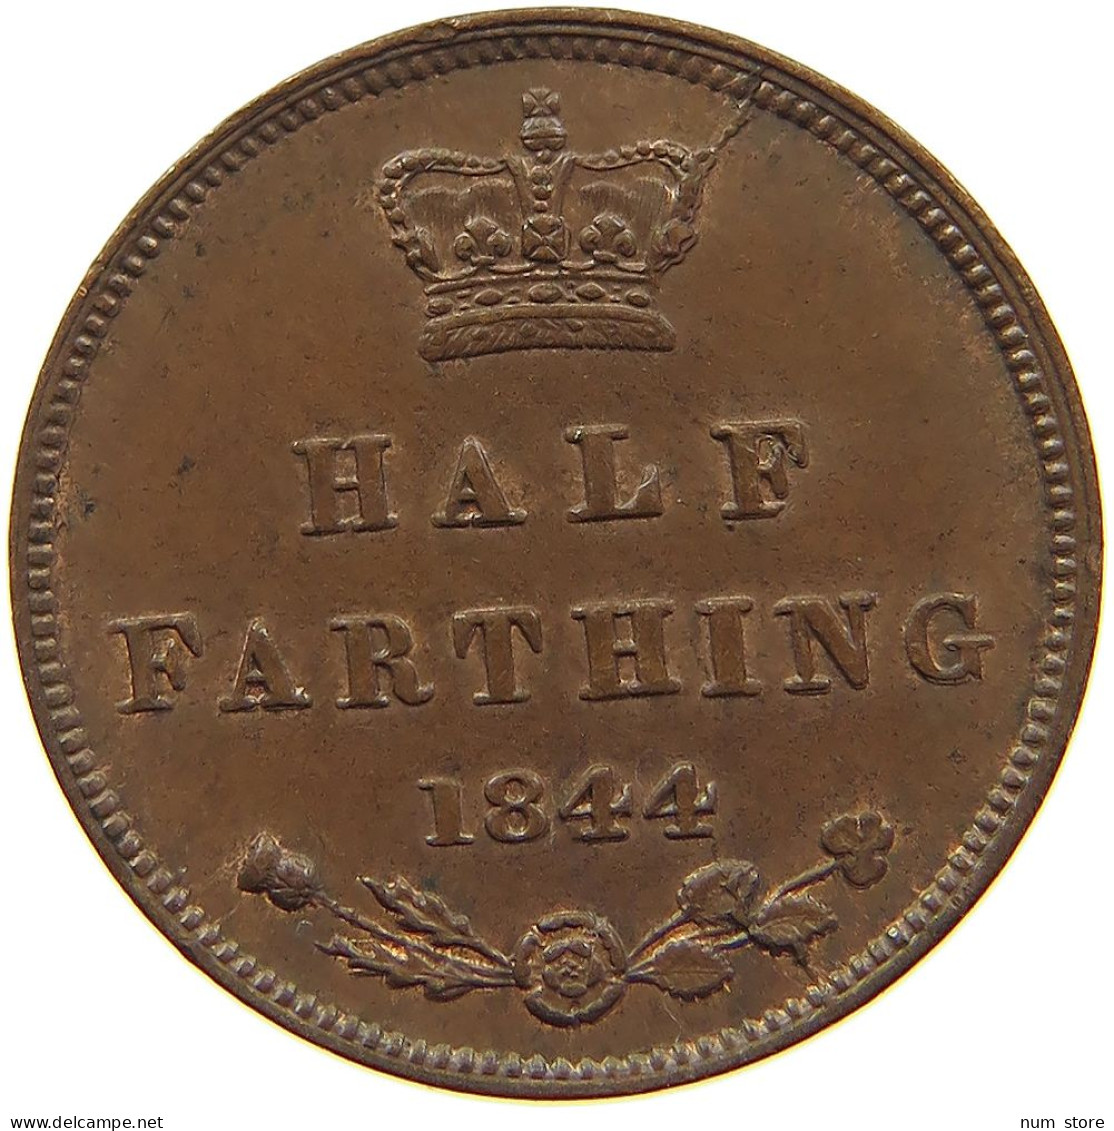 GREAT BRITAIN HALF FARTHING 1844 Victoria 1837-1901 #t158 0749 - A. 1/4 - 1/3 - 1/2 Farthing